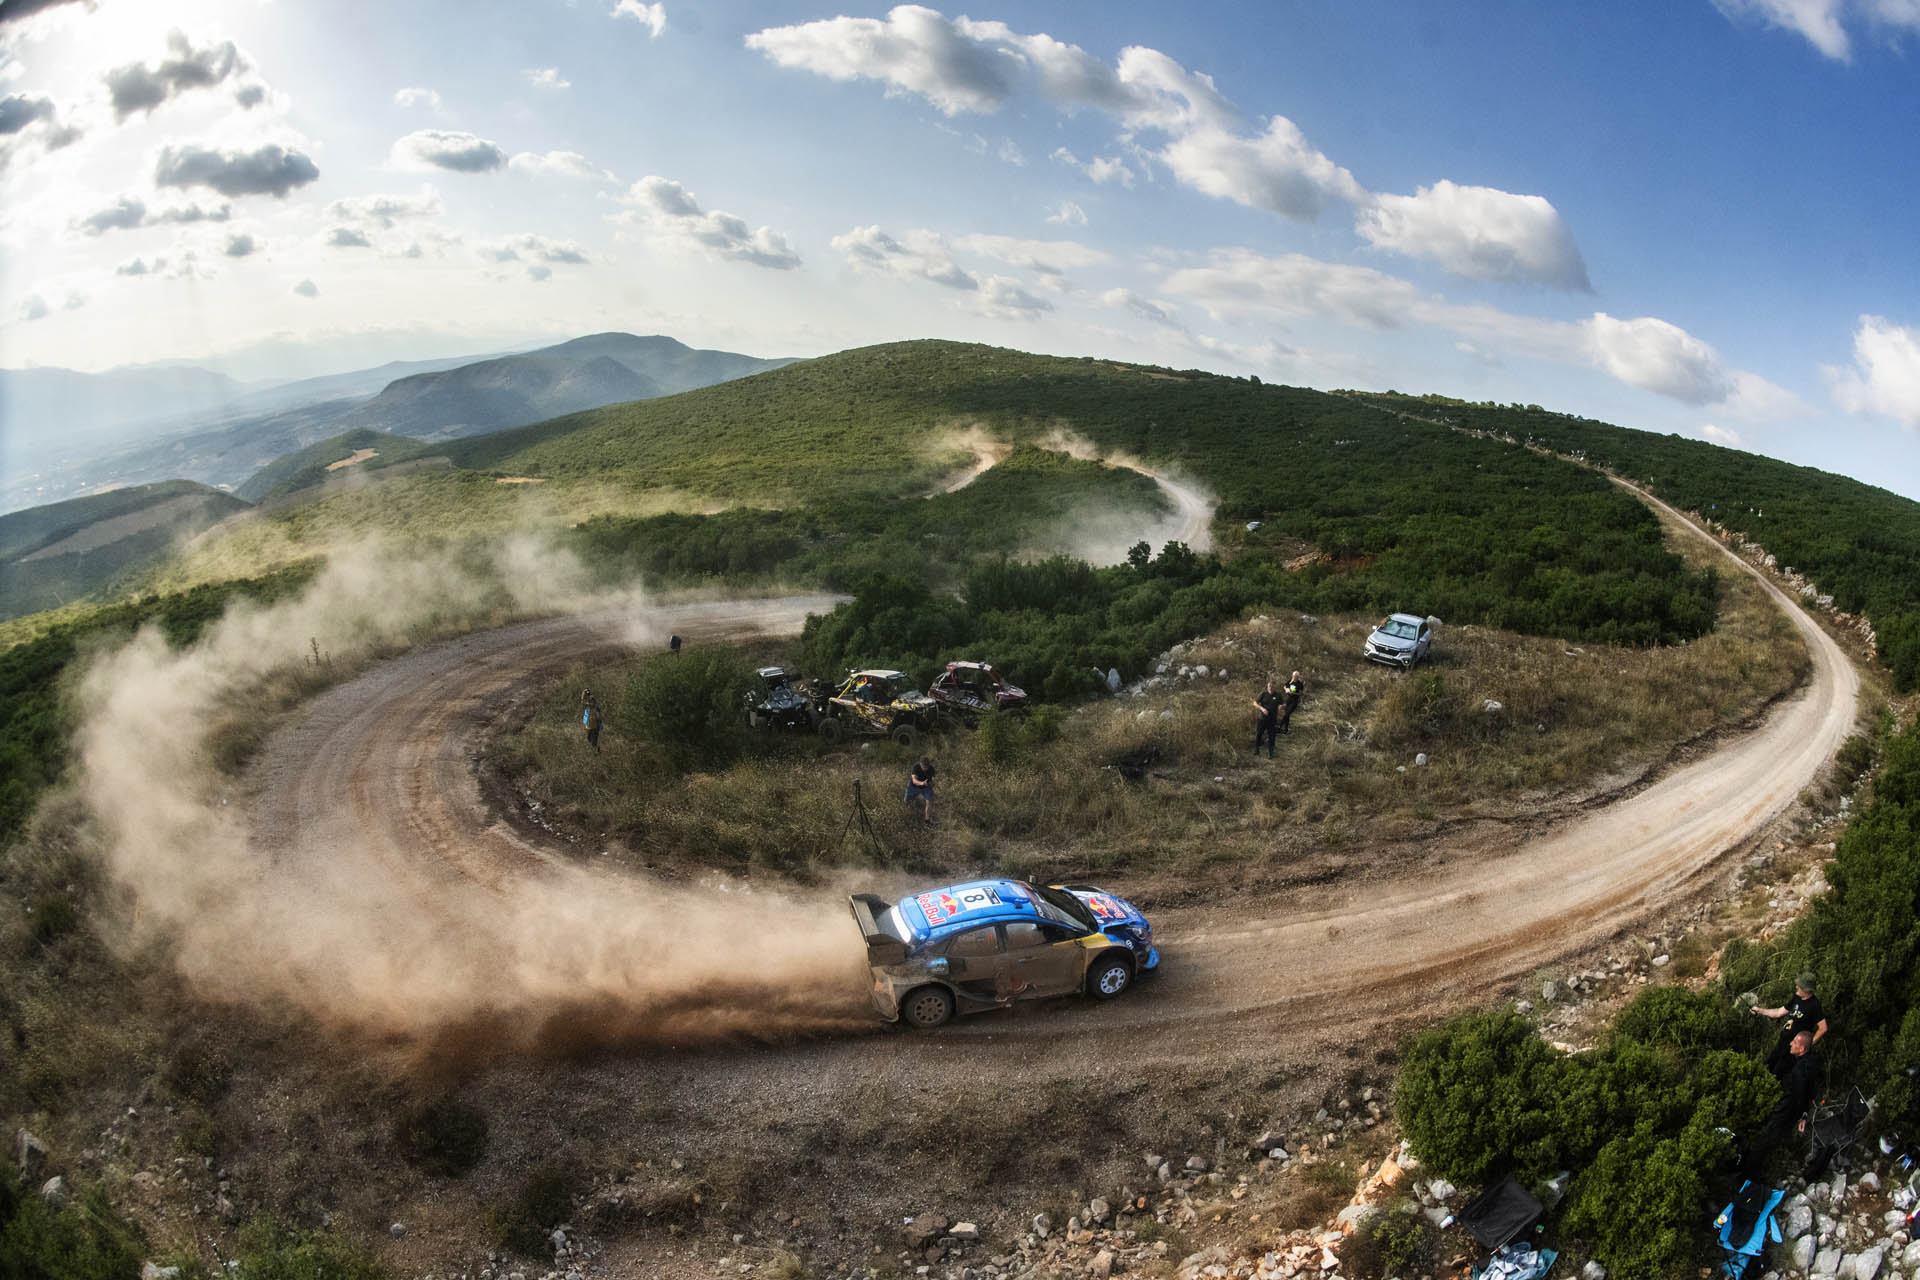 Ott Tänak (EST) Martin Järveoja (EST) of team M-SPORT FORD WORLD RALLY TEAM are seen performing during the World Rally Championship Greece in Lamia, Greece on September 8, 2023 // Jaanus Ree / Red Bull Content Pool // SI202309080918 // Usage for editorial use only //